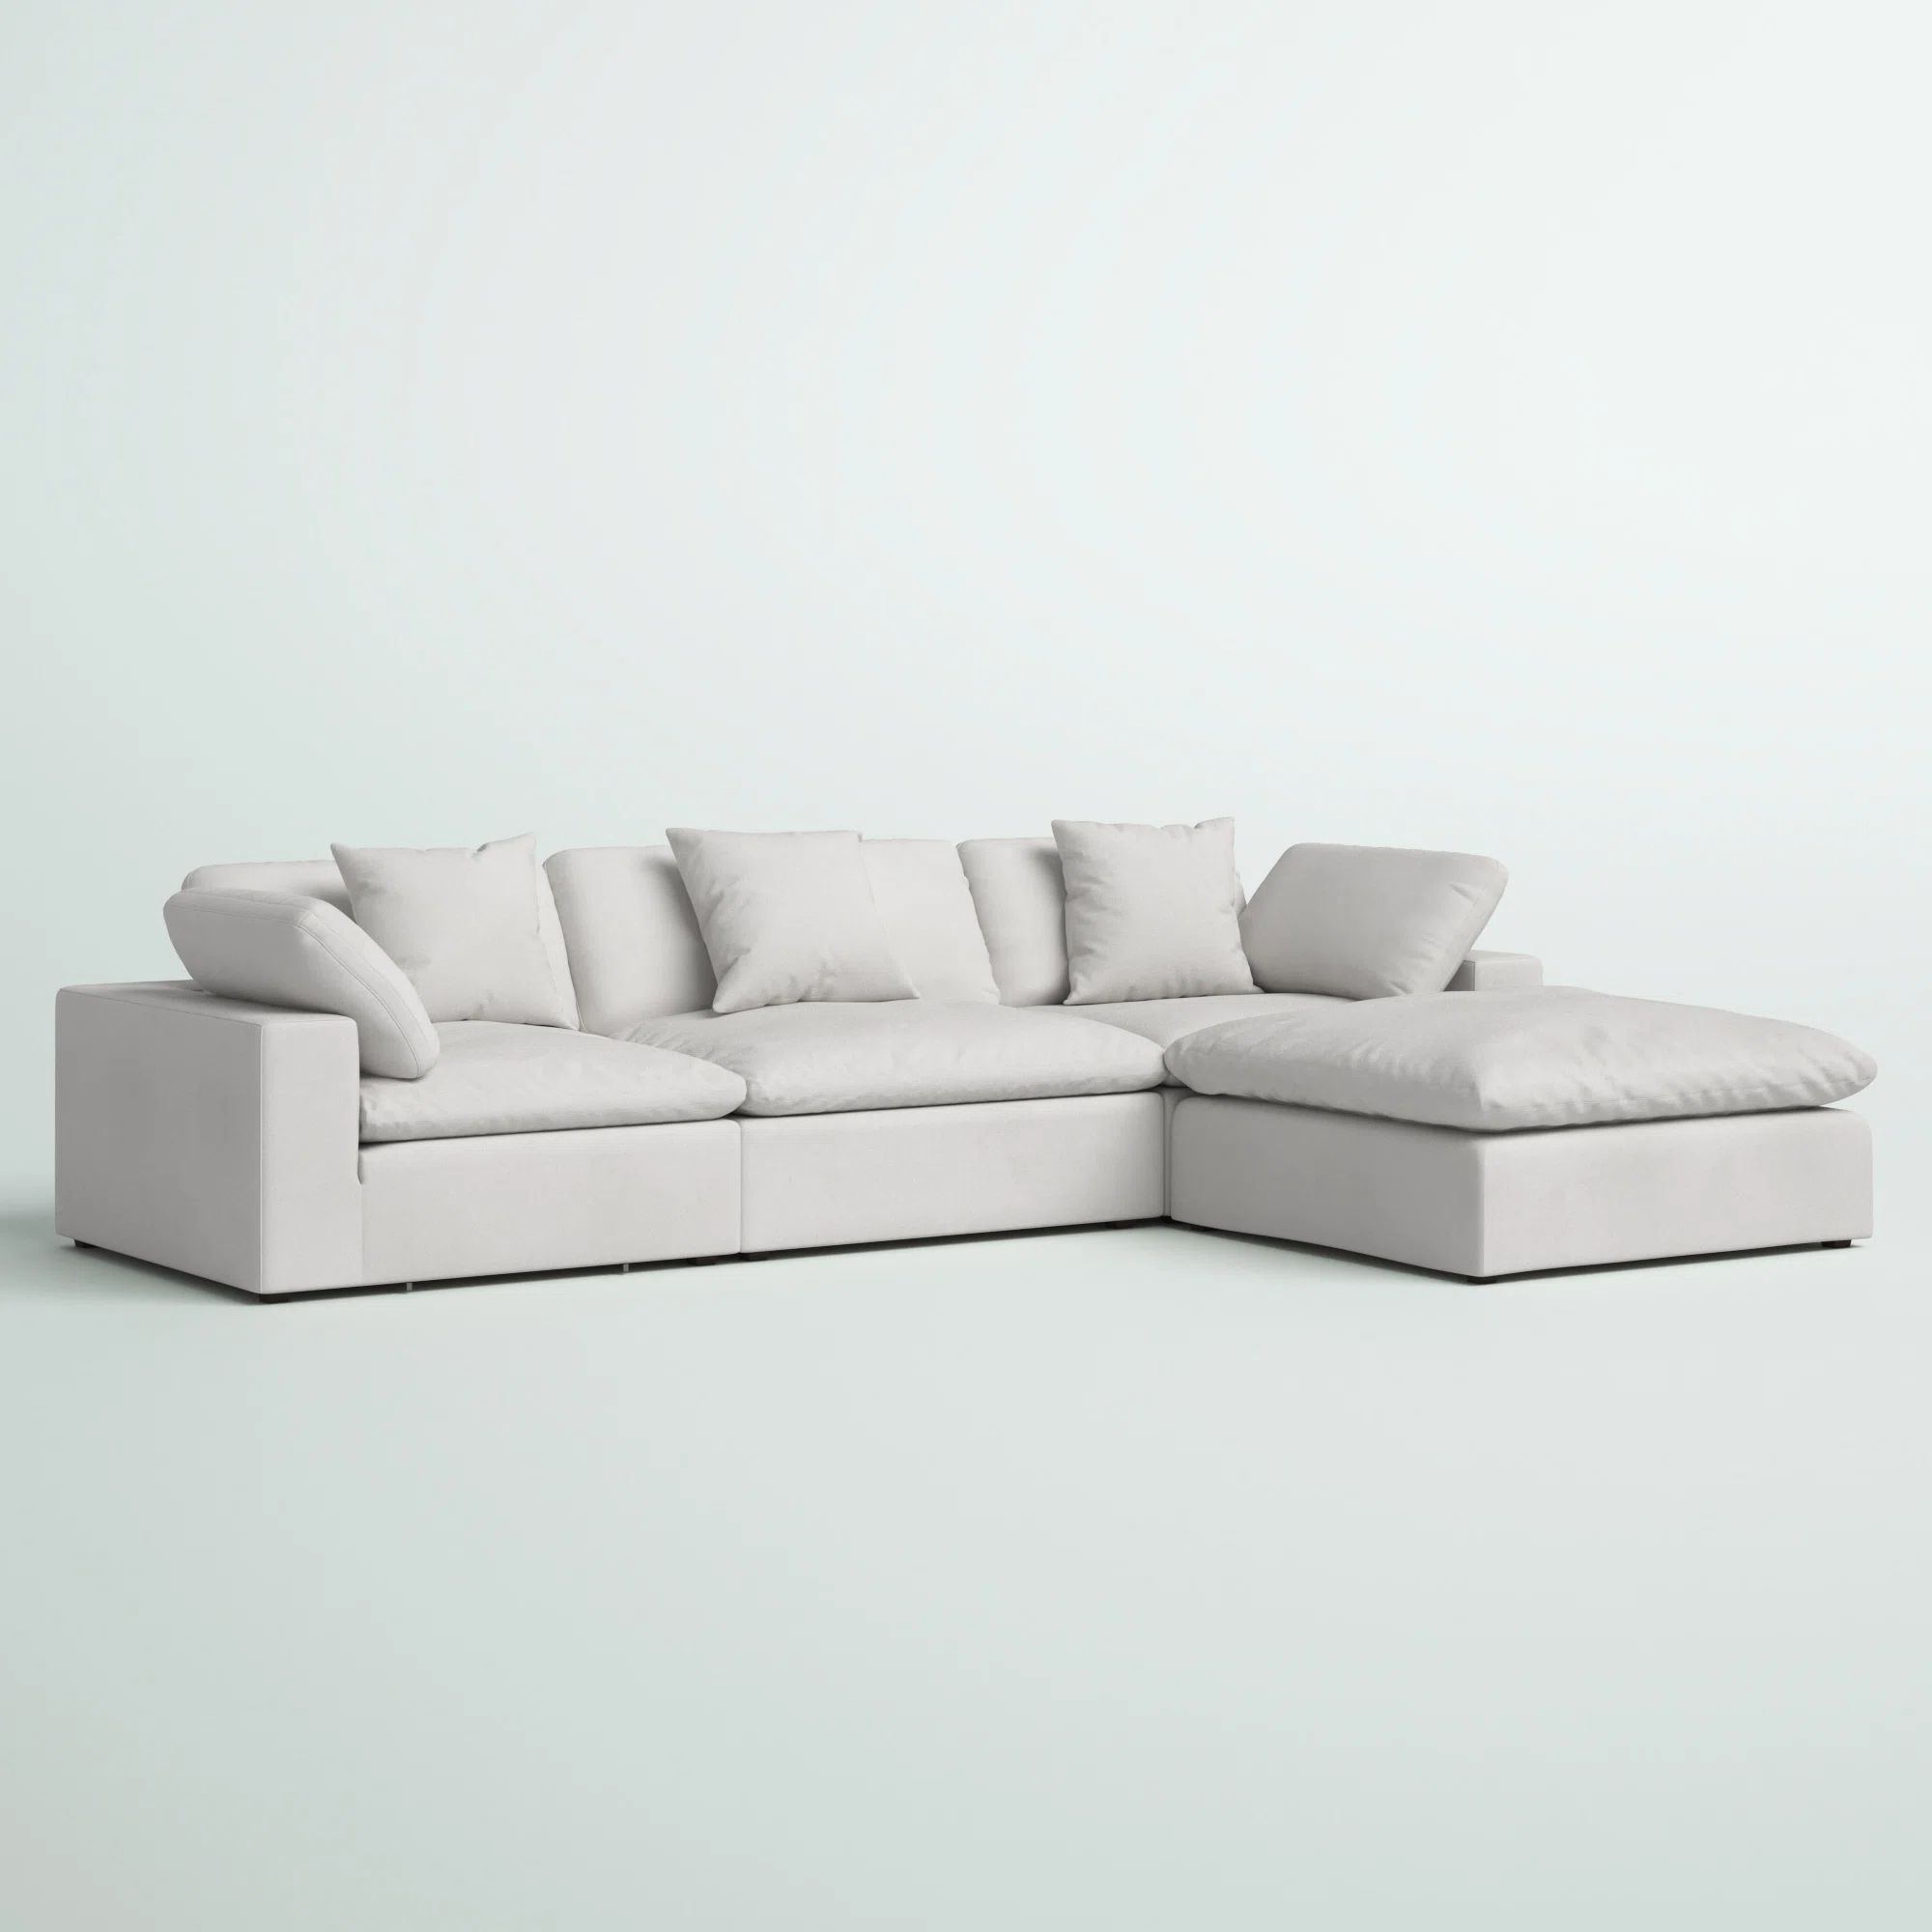 Honaker 4 - Piece Upholstered Sectional Featuring Stain Resistant LiveSmart Fabric | Wayfair North America